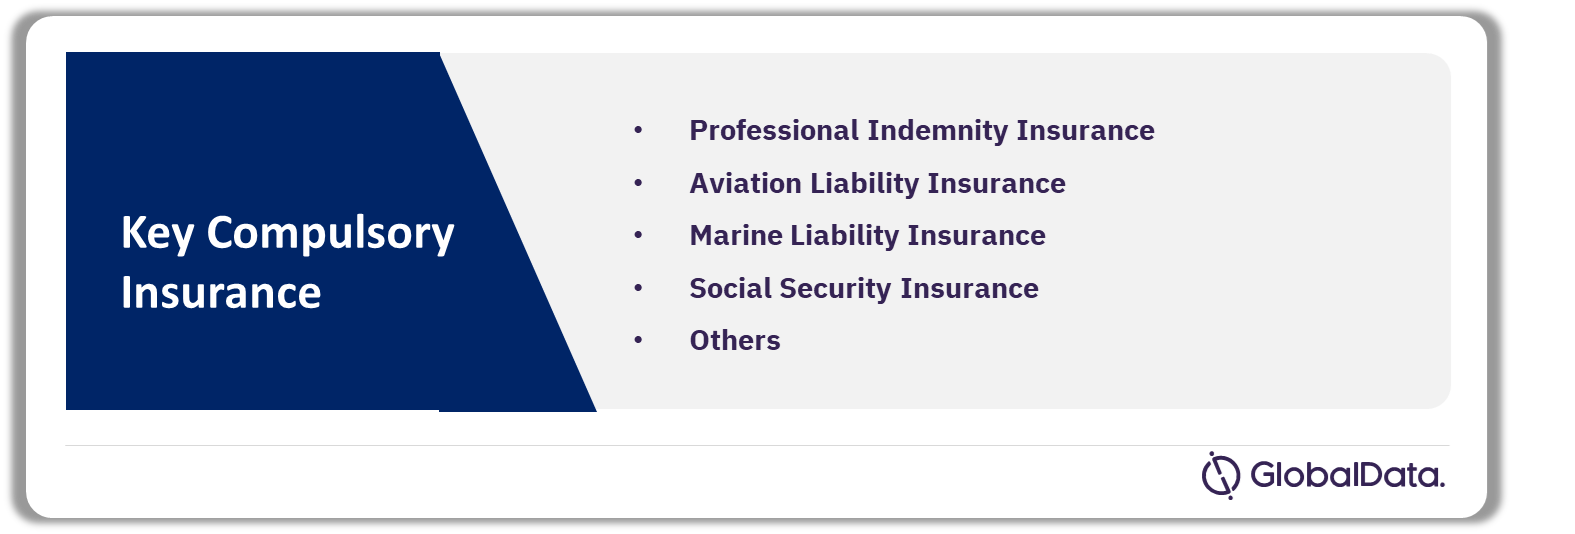 Indonesia Insurance Industry Analysis by Compulsory Insurances